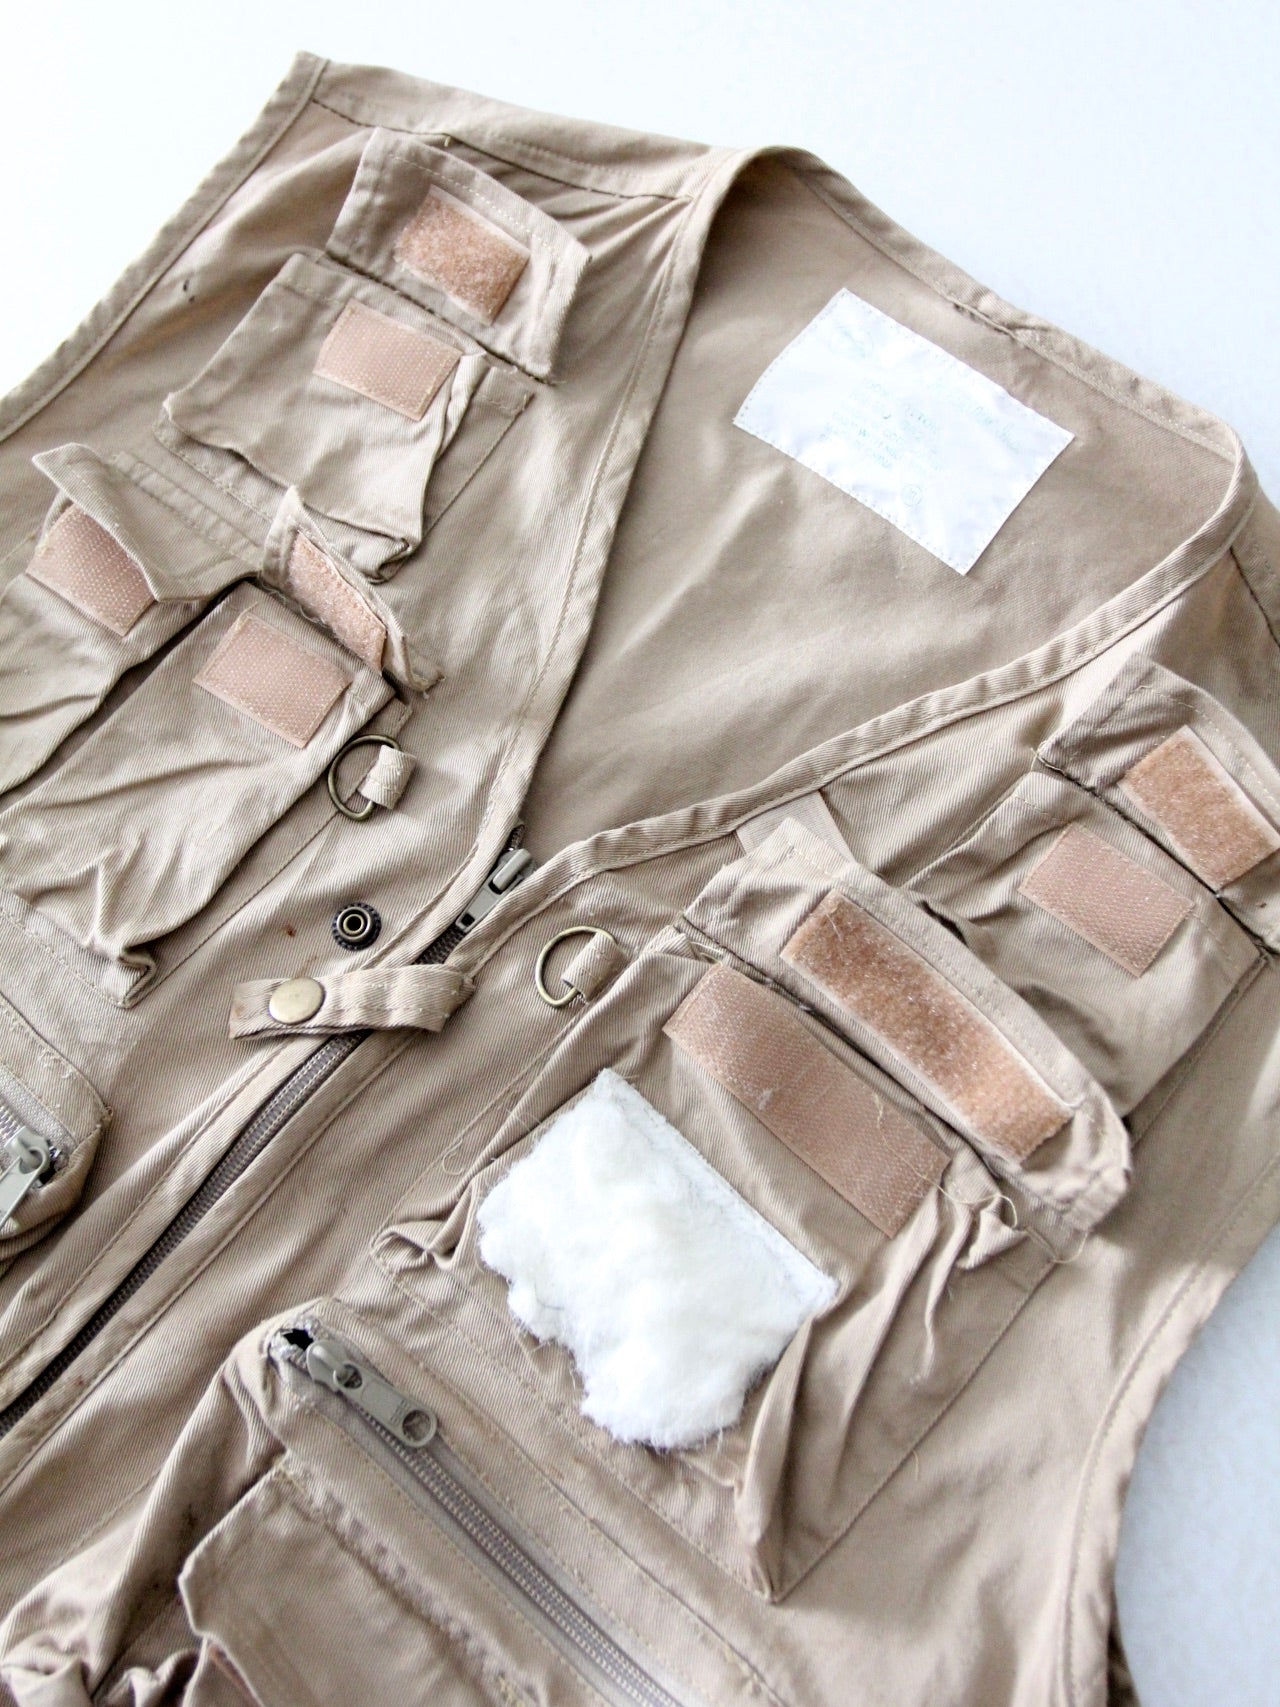 Vintage New With Tags the Pro vest Fly Fishing Vest khaki Sz xl NOS